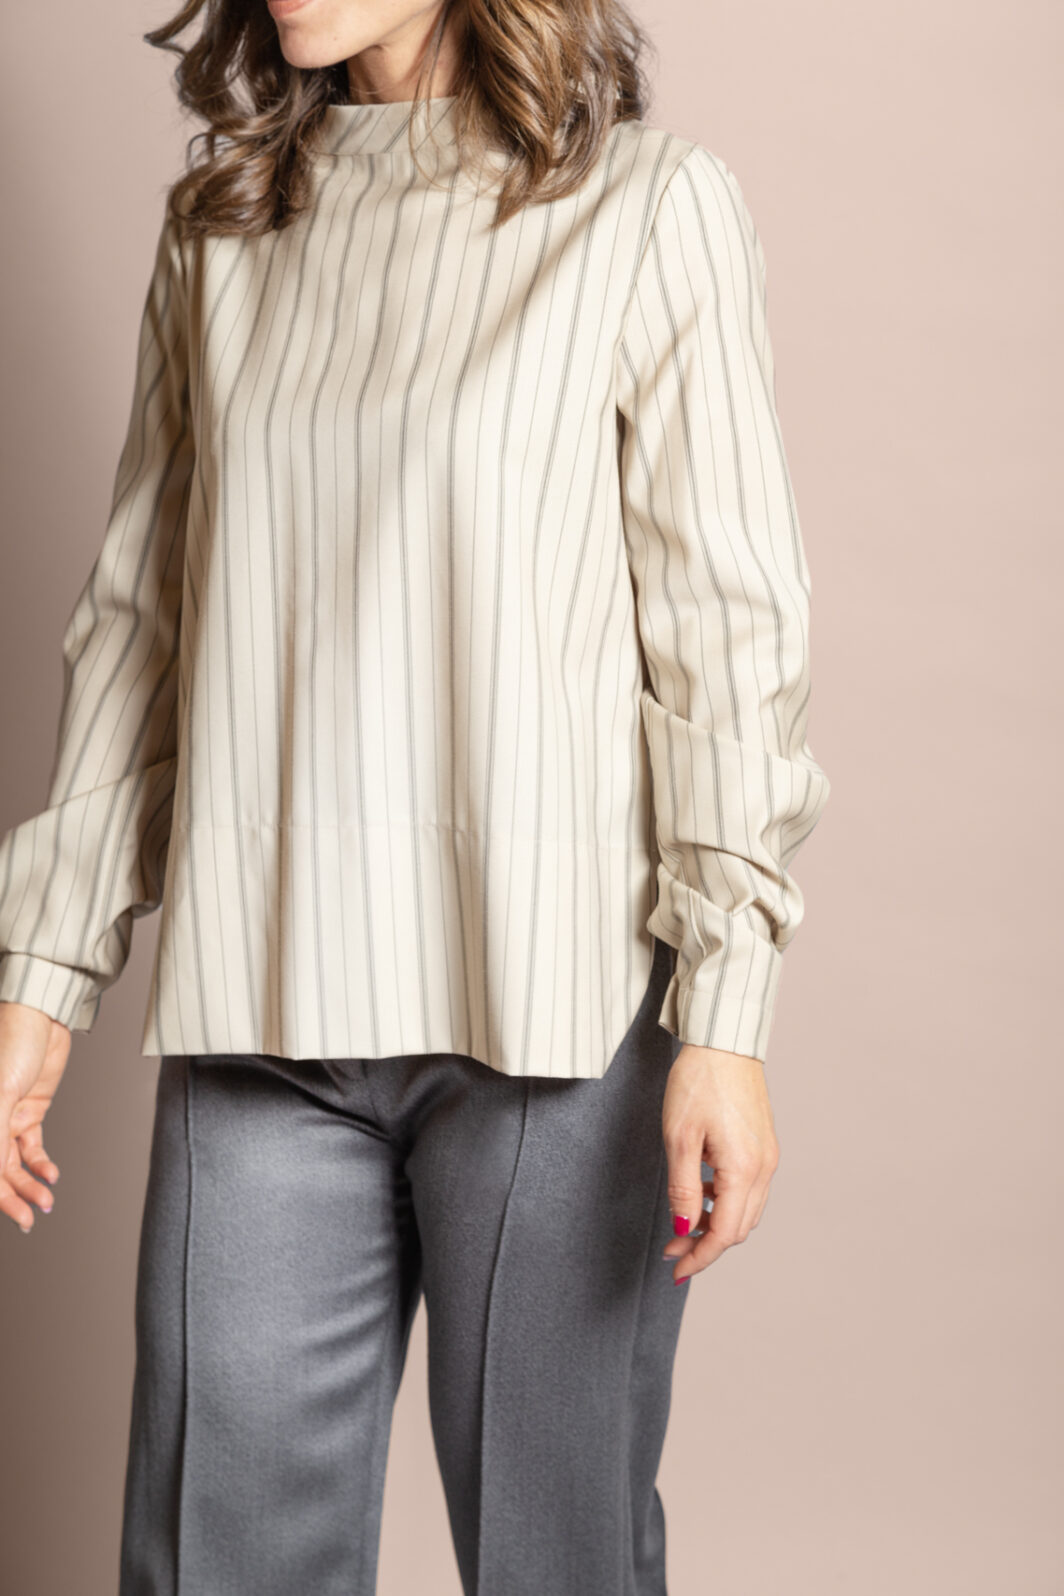 beclò atelier made in italy blusa camicia collo cratere lana bianco Pam